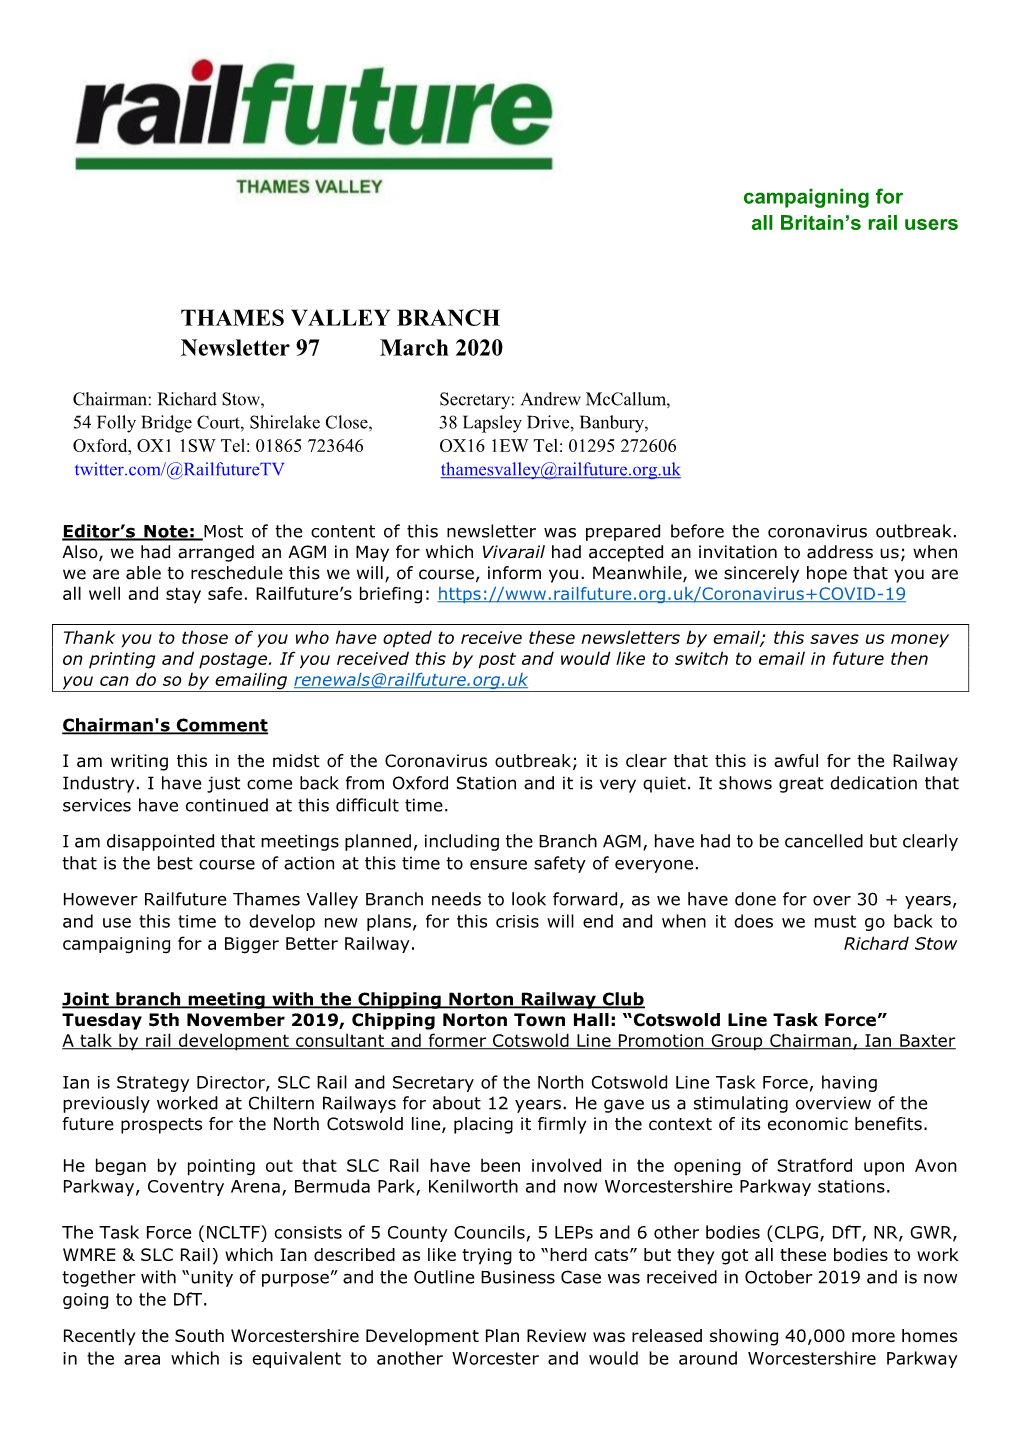 THAMES VALLEY BRANCH Newsletter 97 March 2020